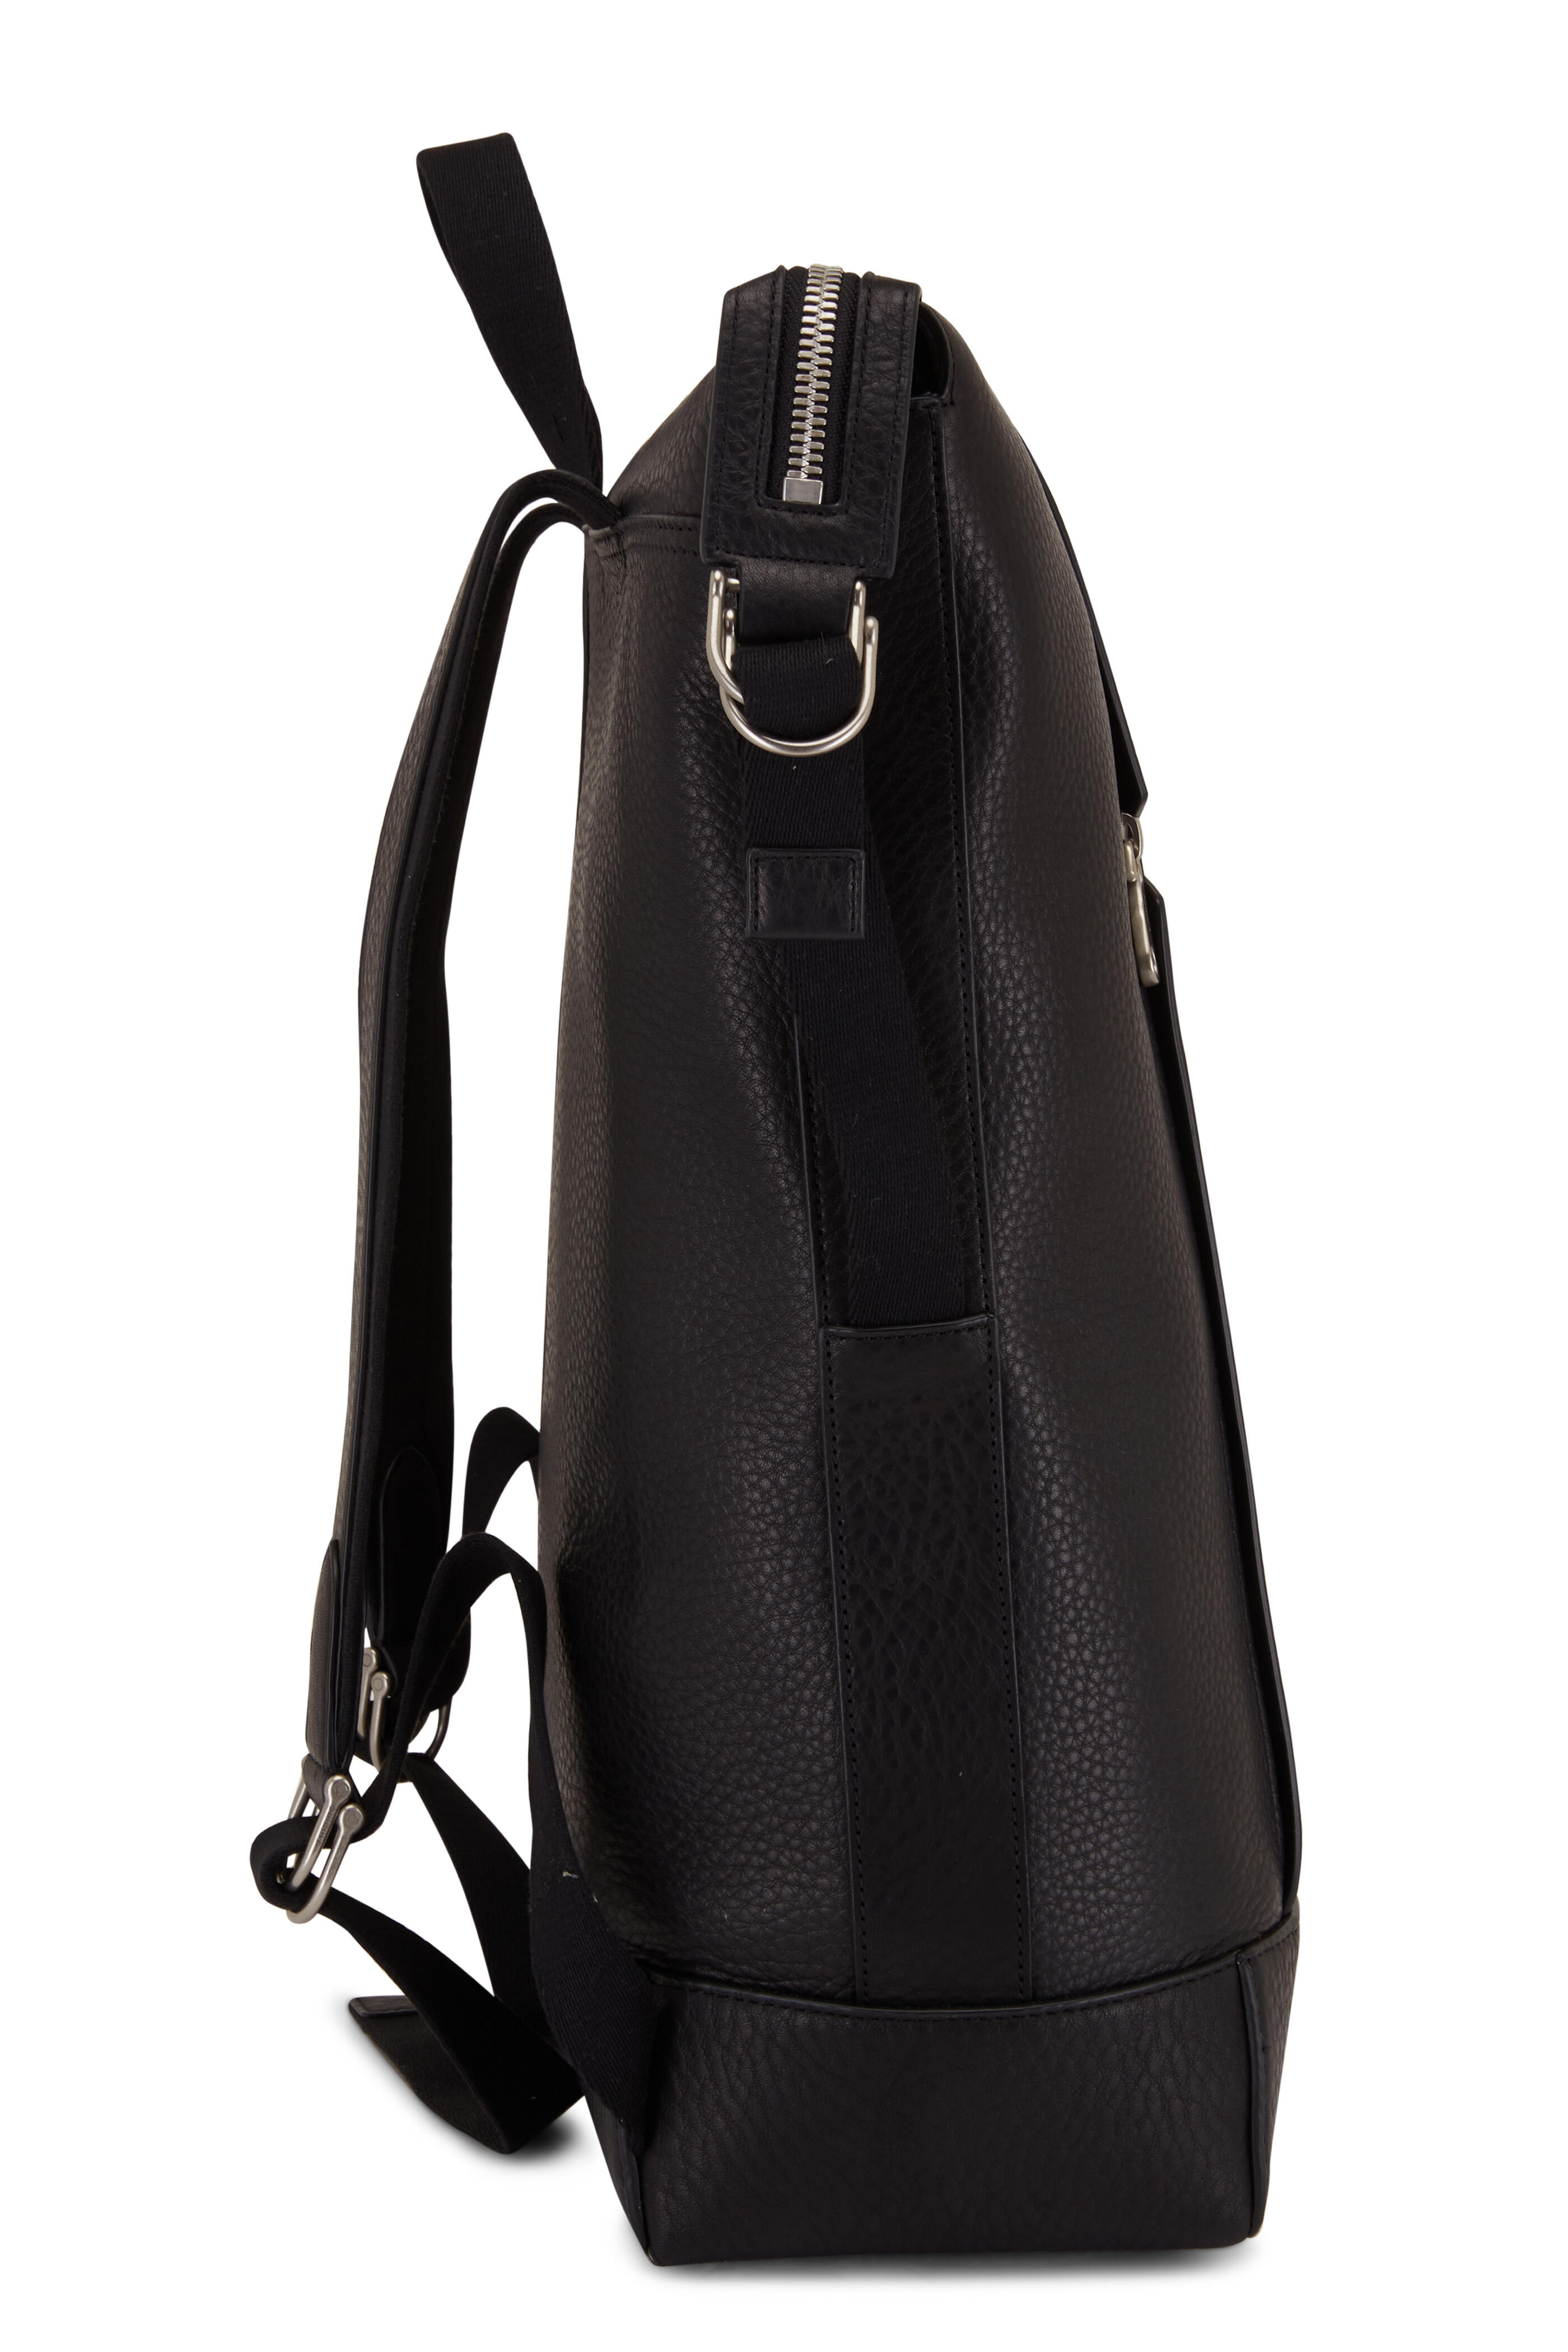 Moss | Men's Black Grained Leather Backpack